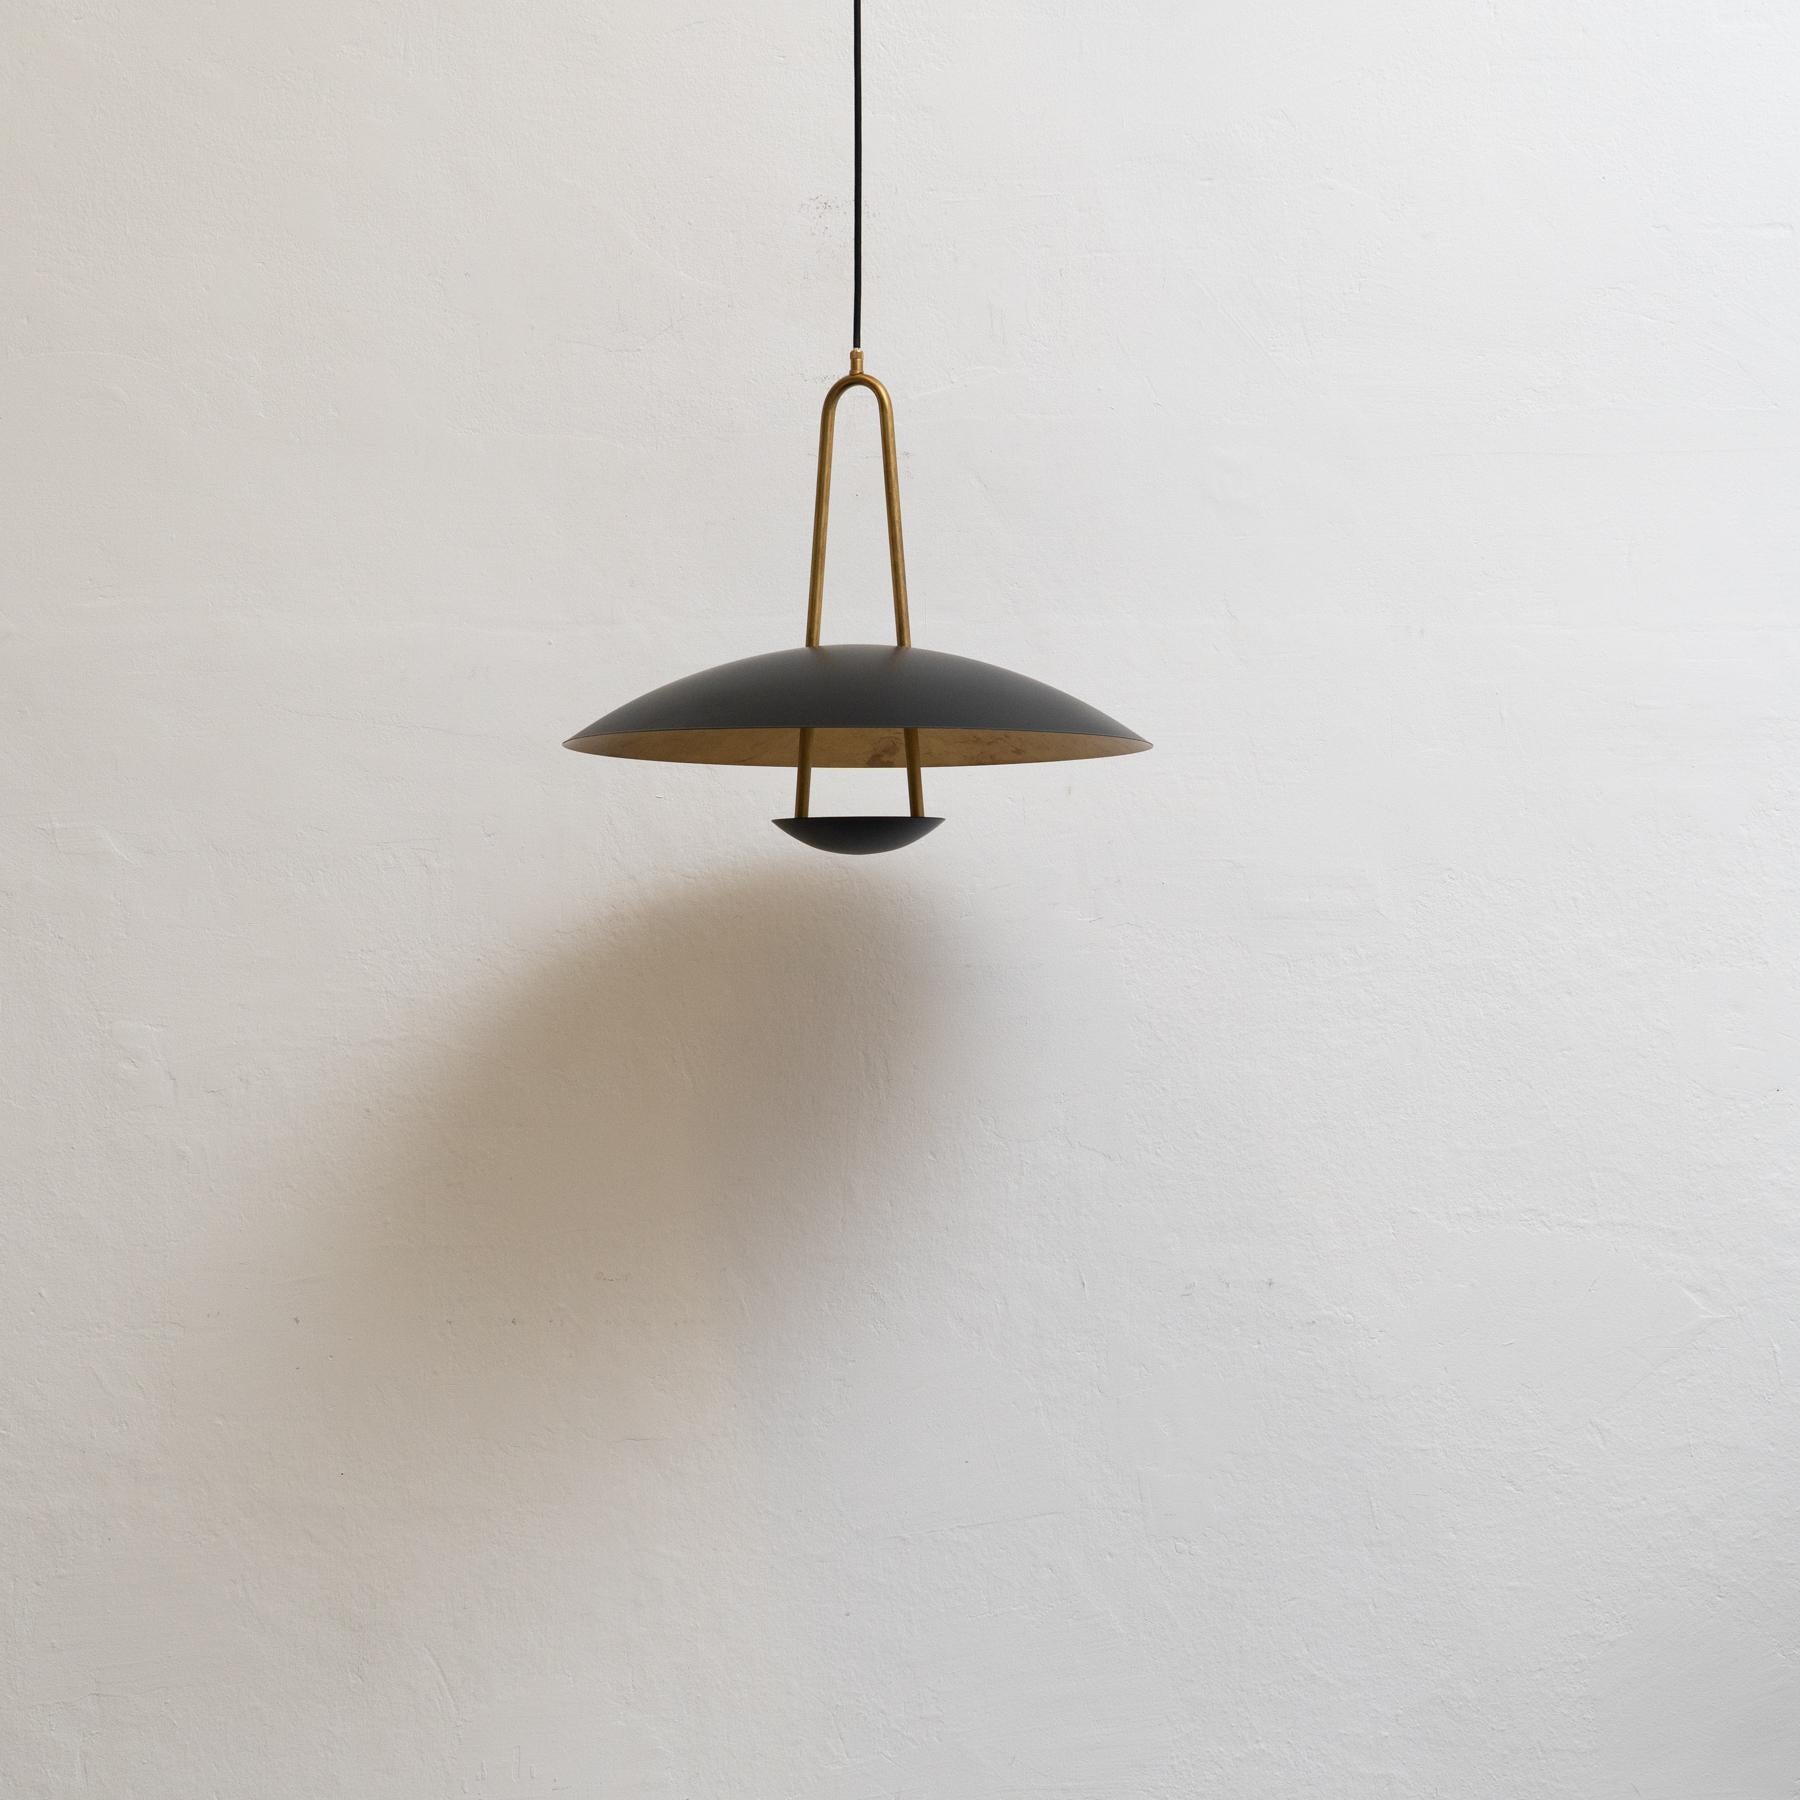 Add a touch of Scandinavian elegance to your home with this stunning ceiling lamp by Konsthantverk. Designed by Johan Carpner, the Satellit 55 model features a sleek black mat and raw brass finish. Crafted using traditional techniques, this lamp is